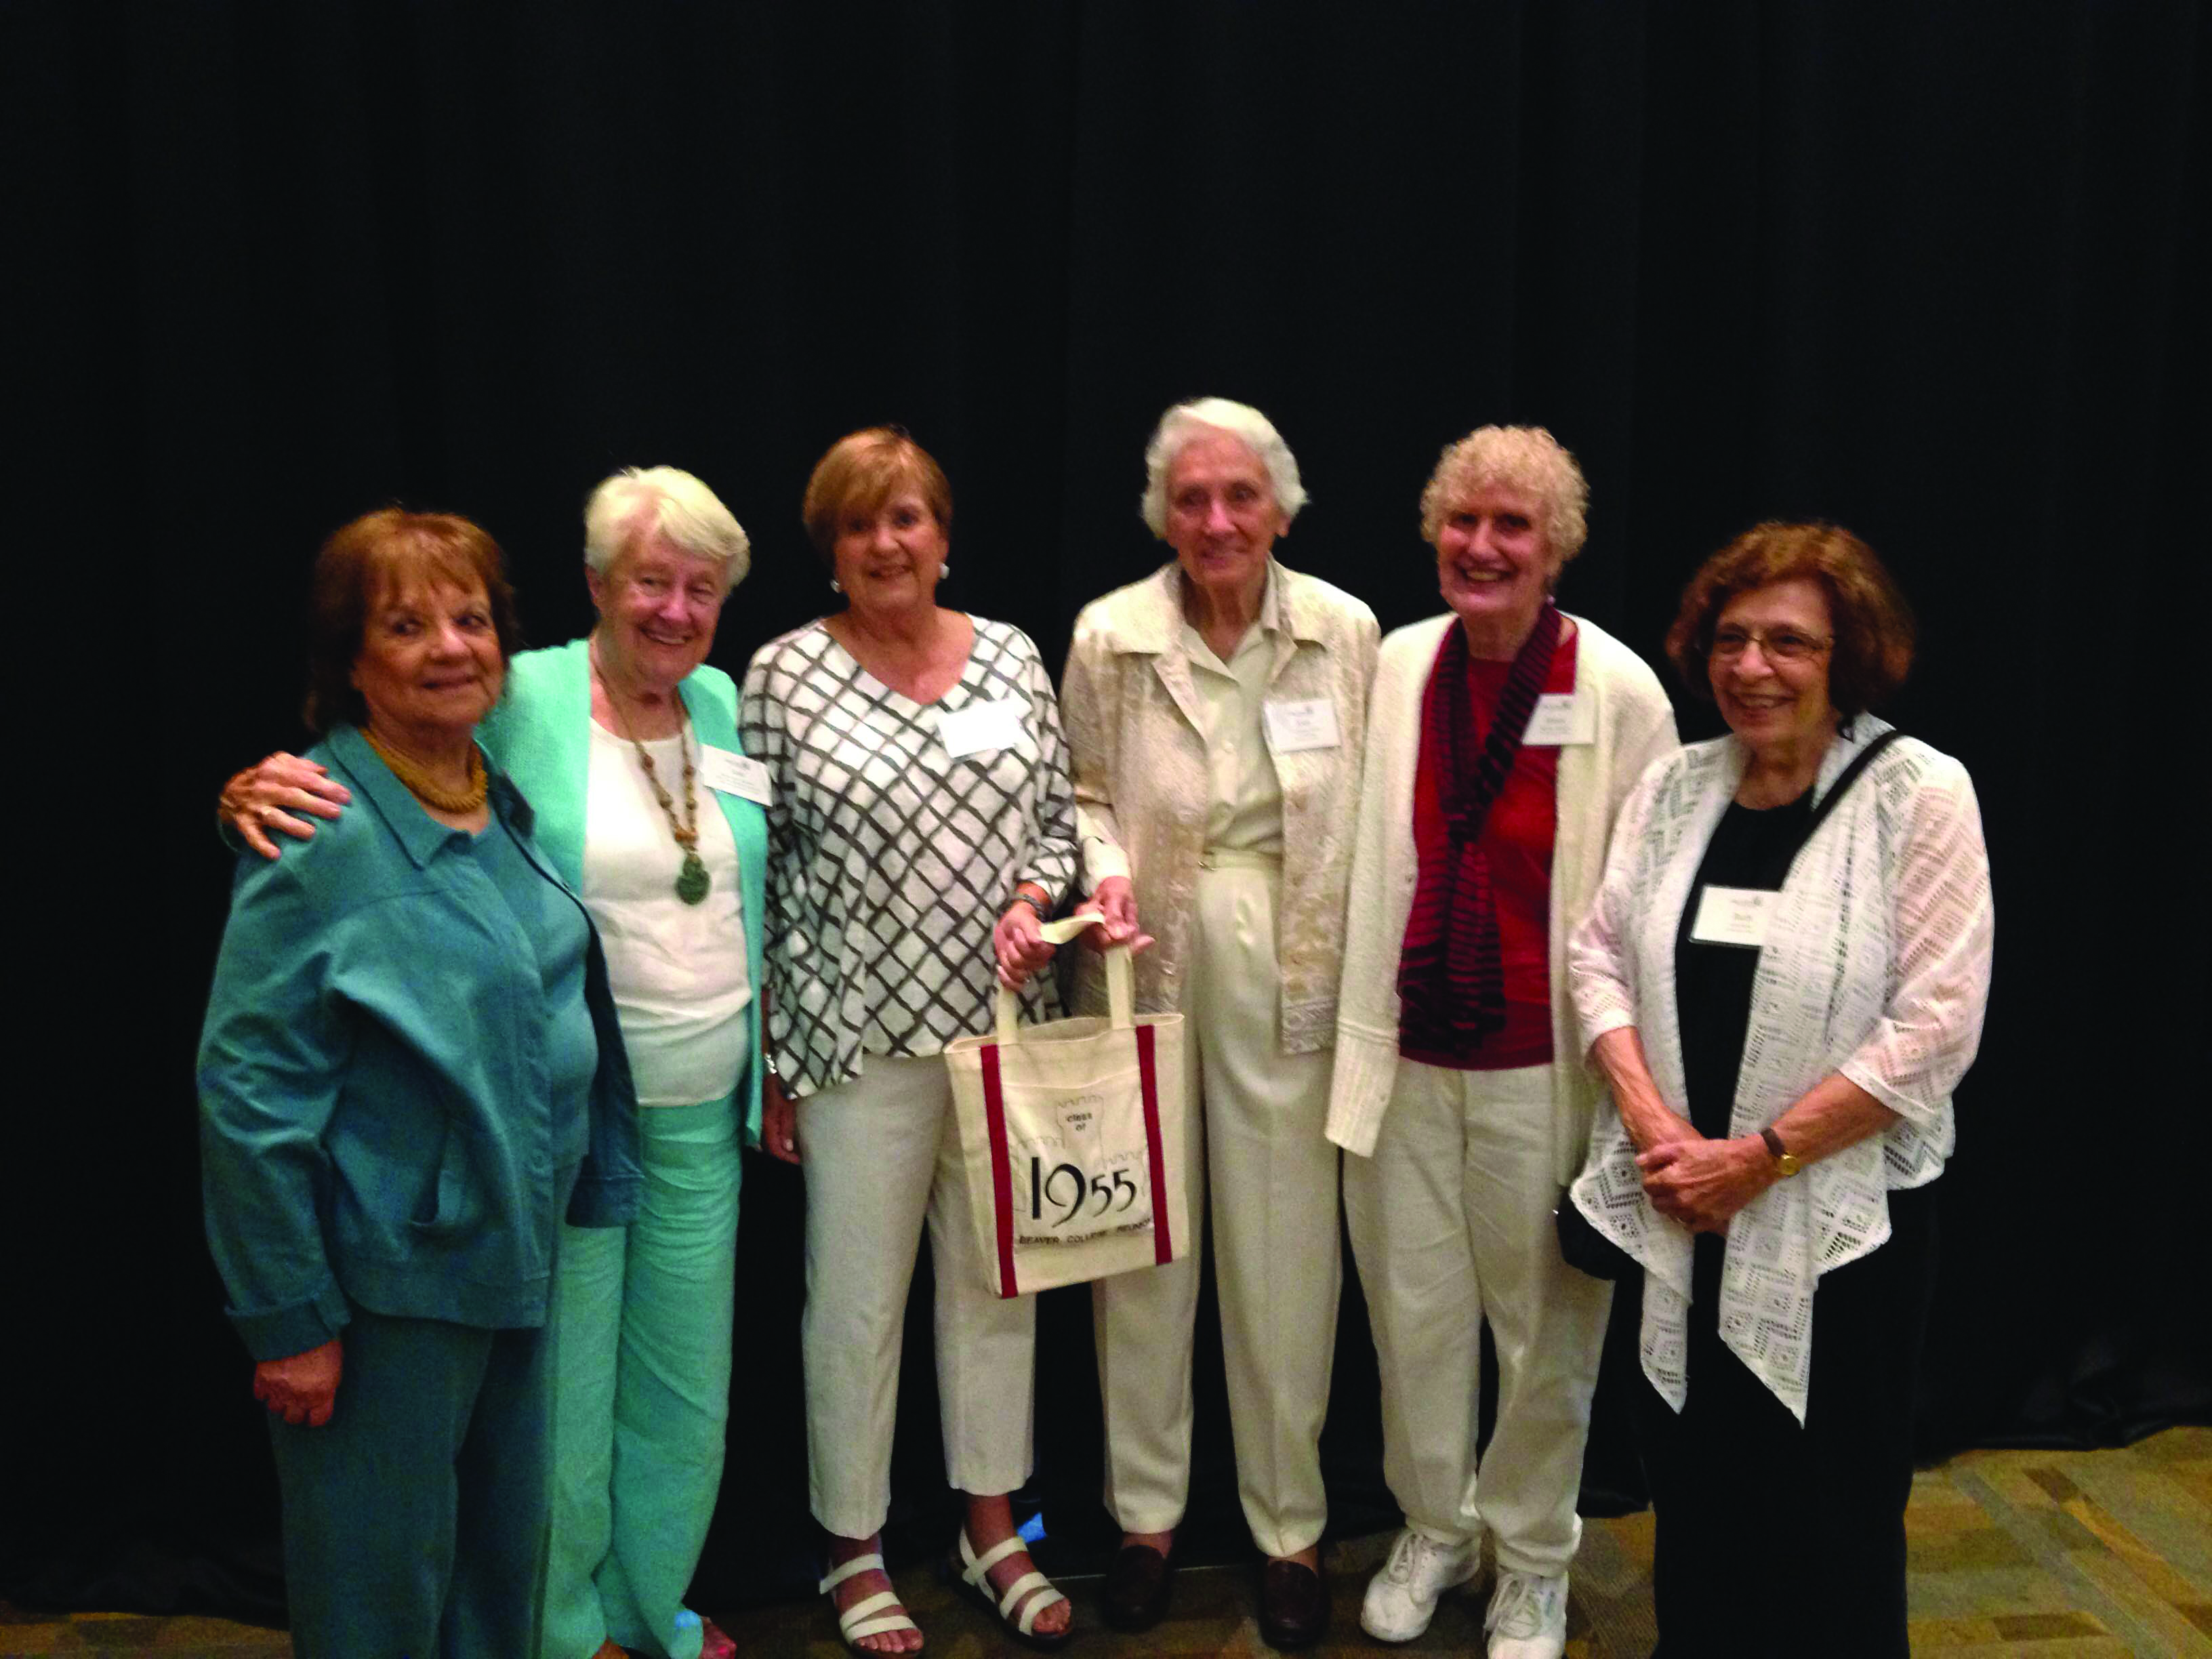 Members of the Class of ’55 posing together.